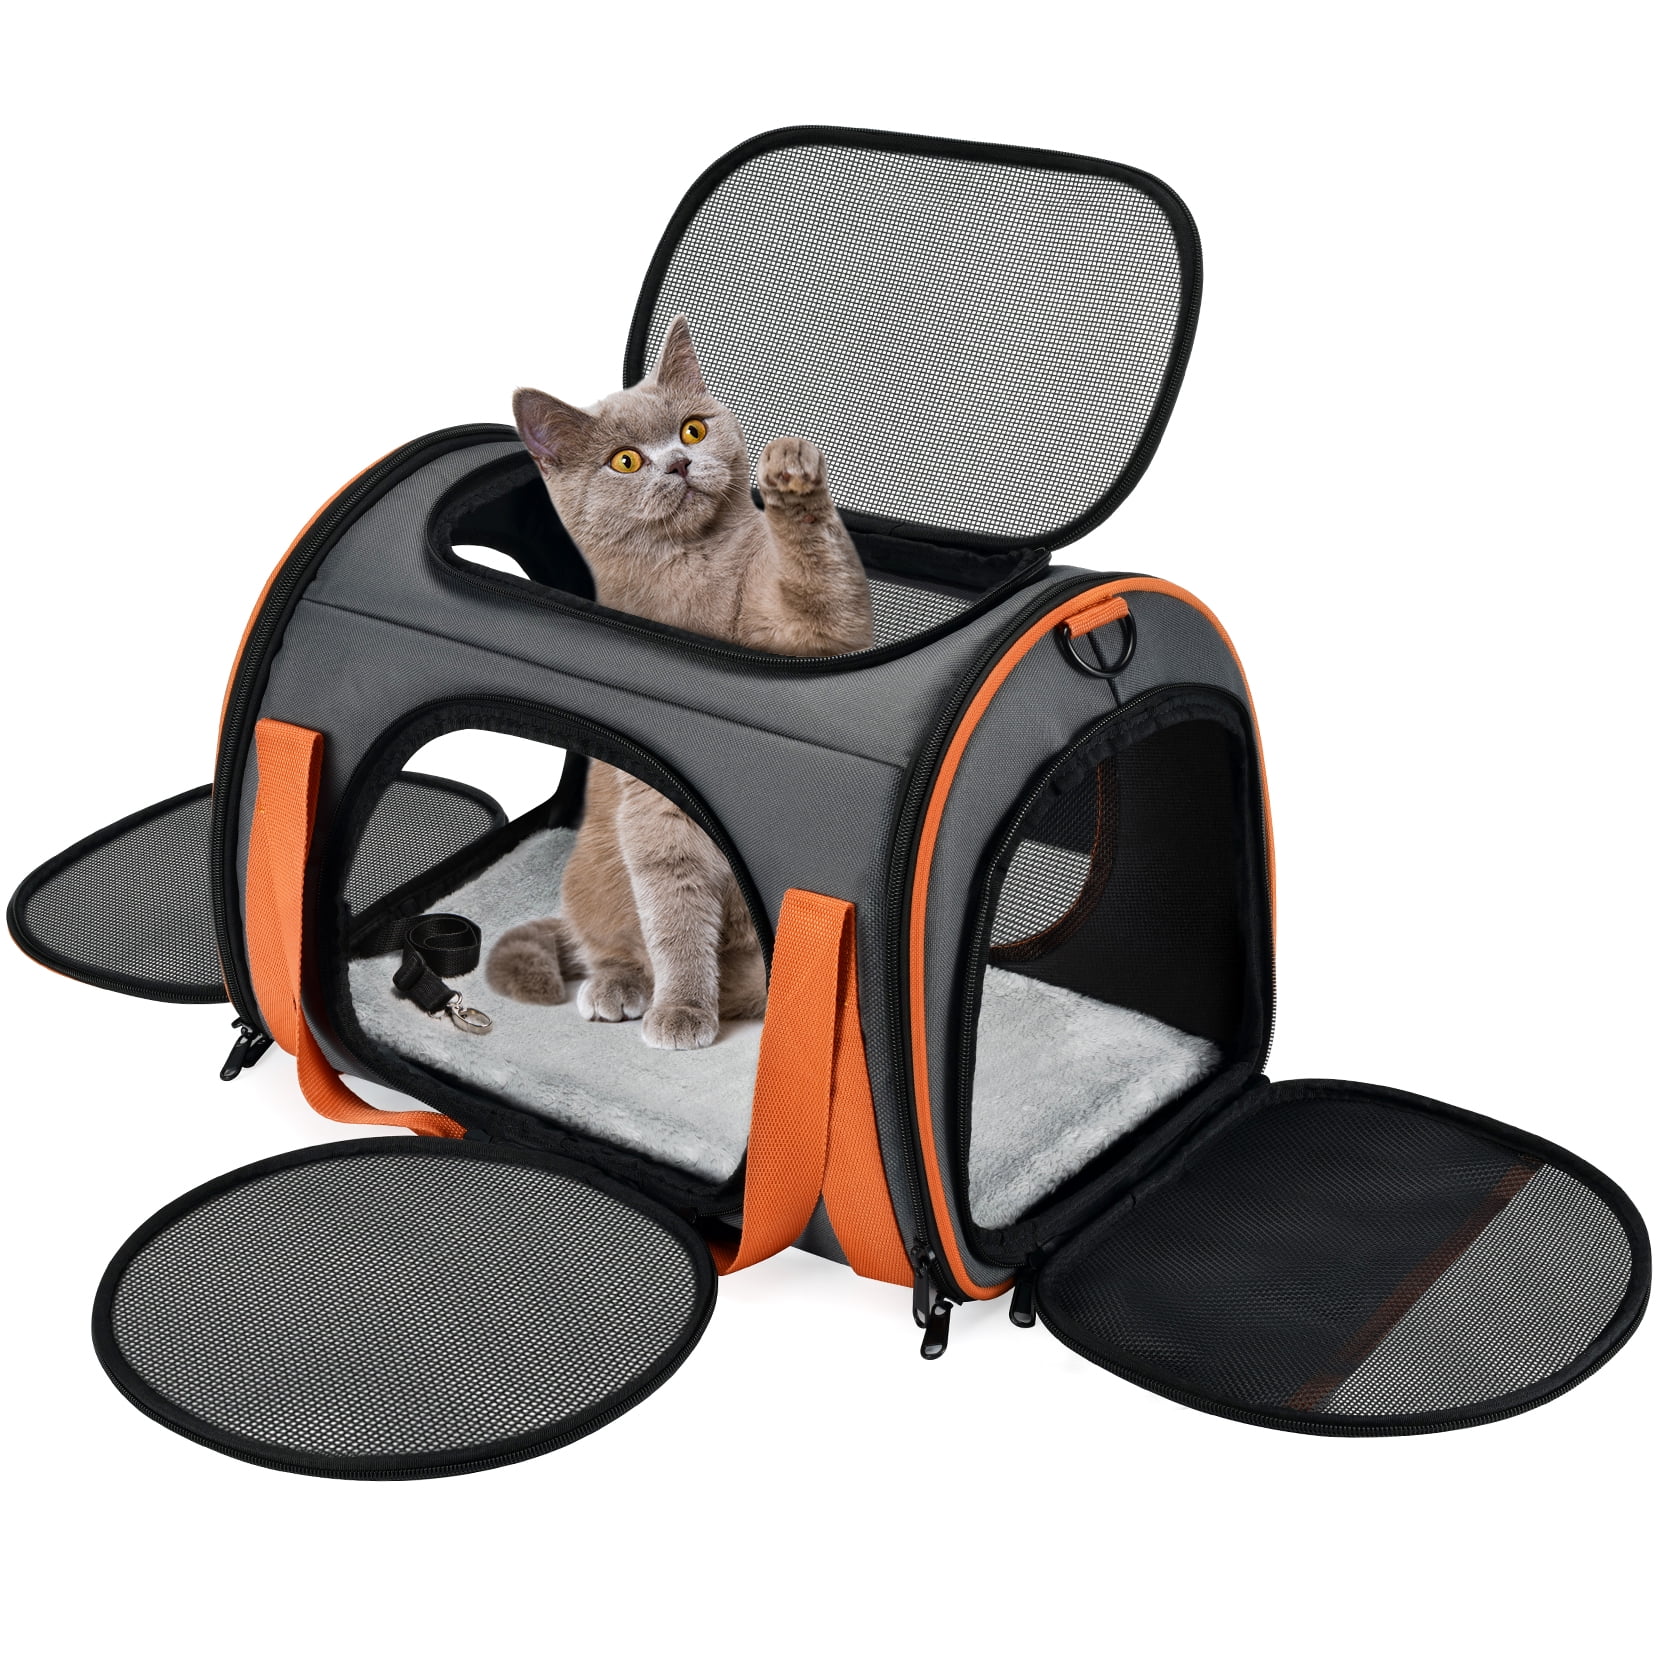 How to Choose the Right Airline-Approved Pet Carrier for Your Cat